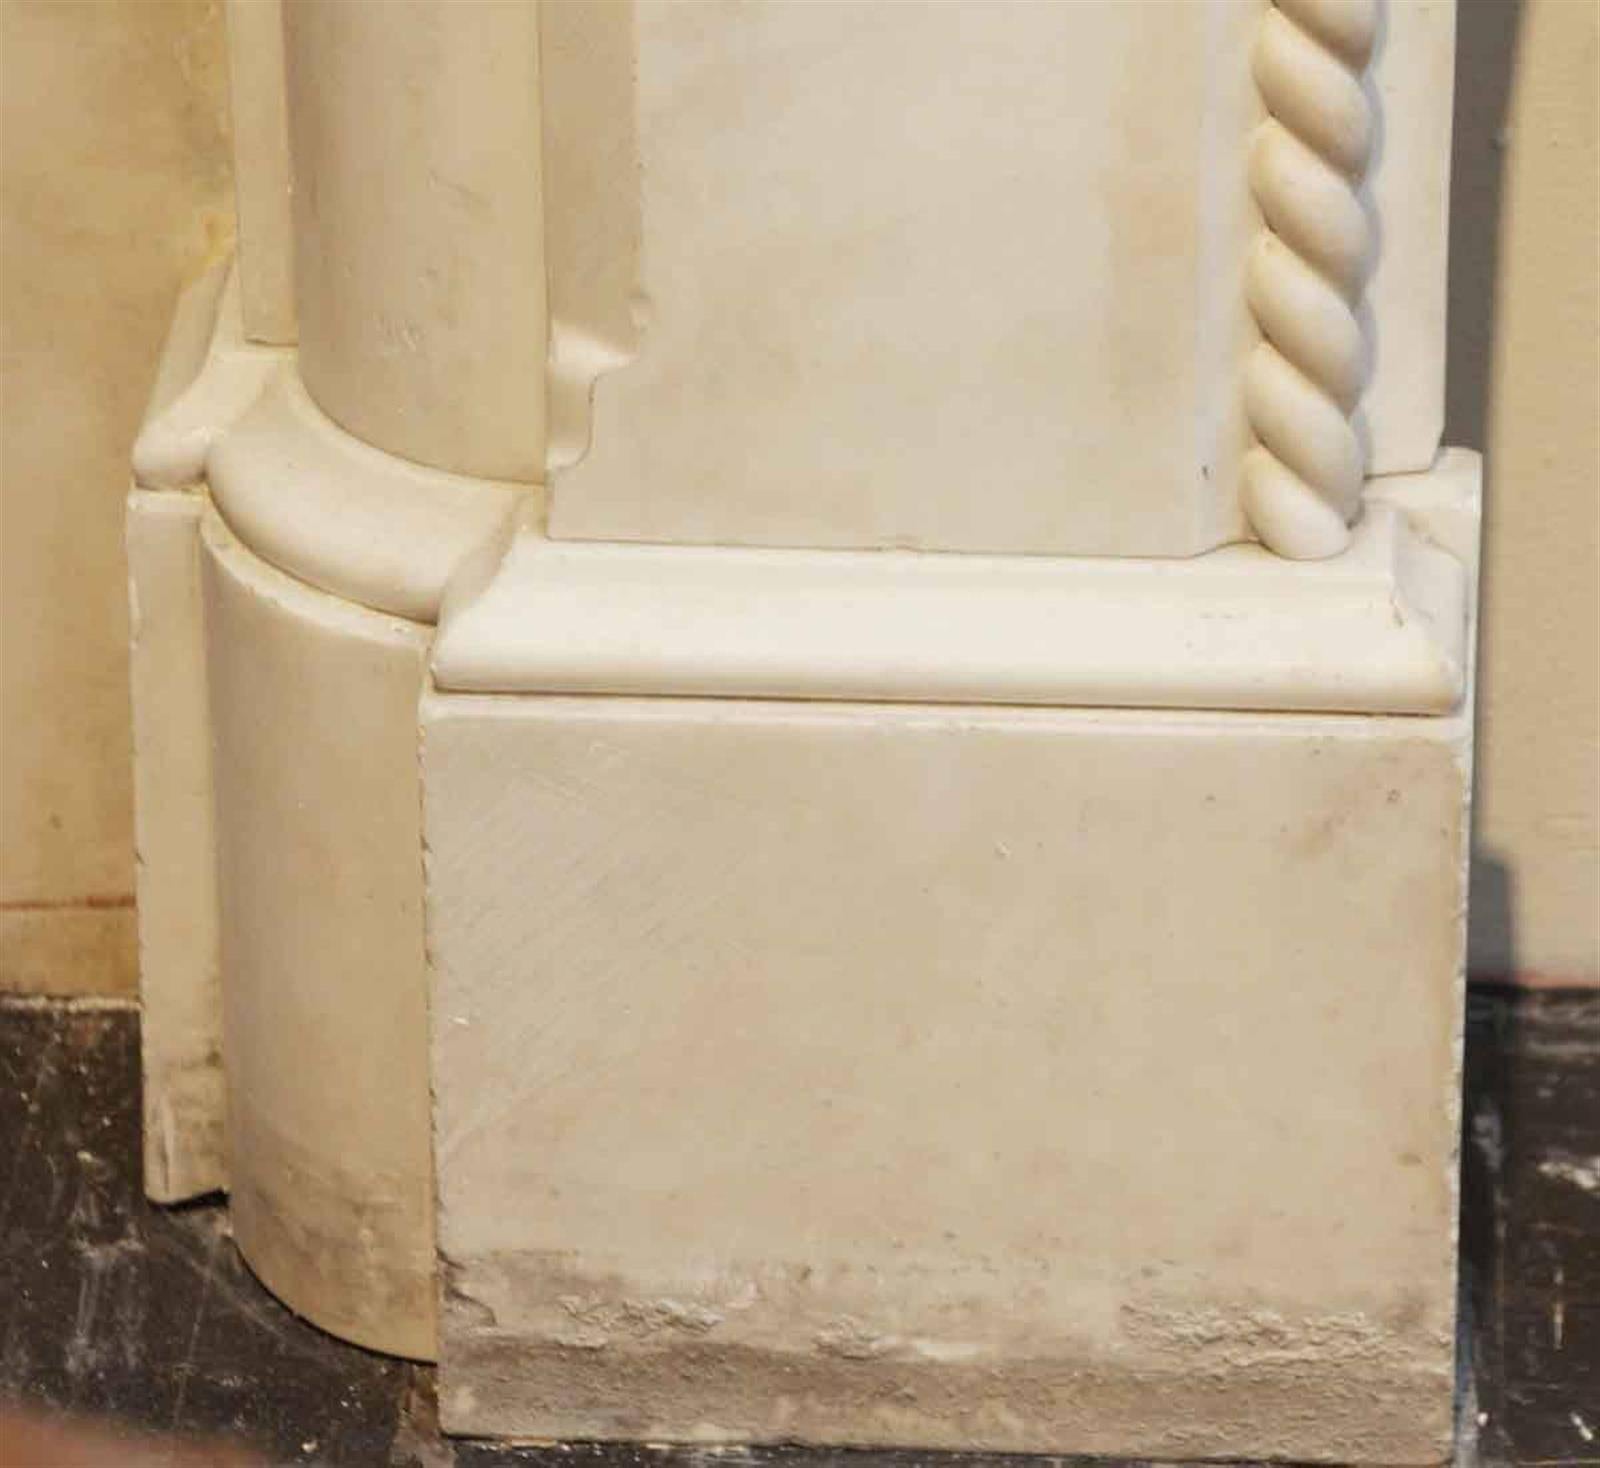 Early 20th Century 1905 Heavily Carved White Marble Rope Design Mantel from the West Village